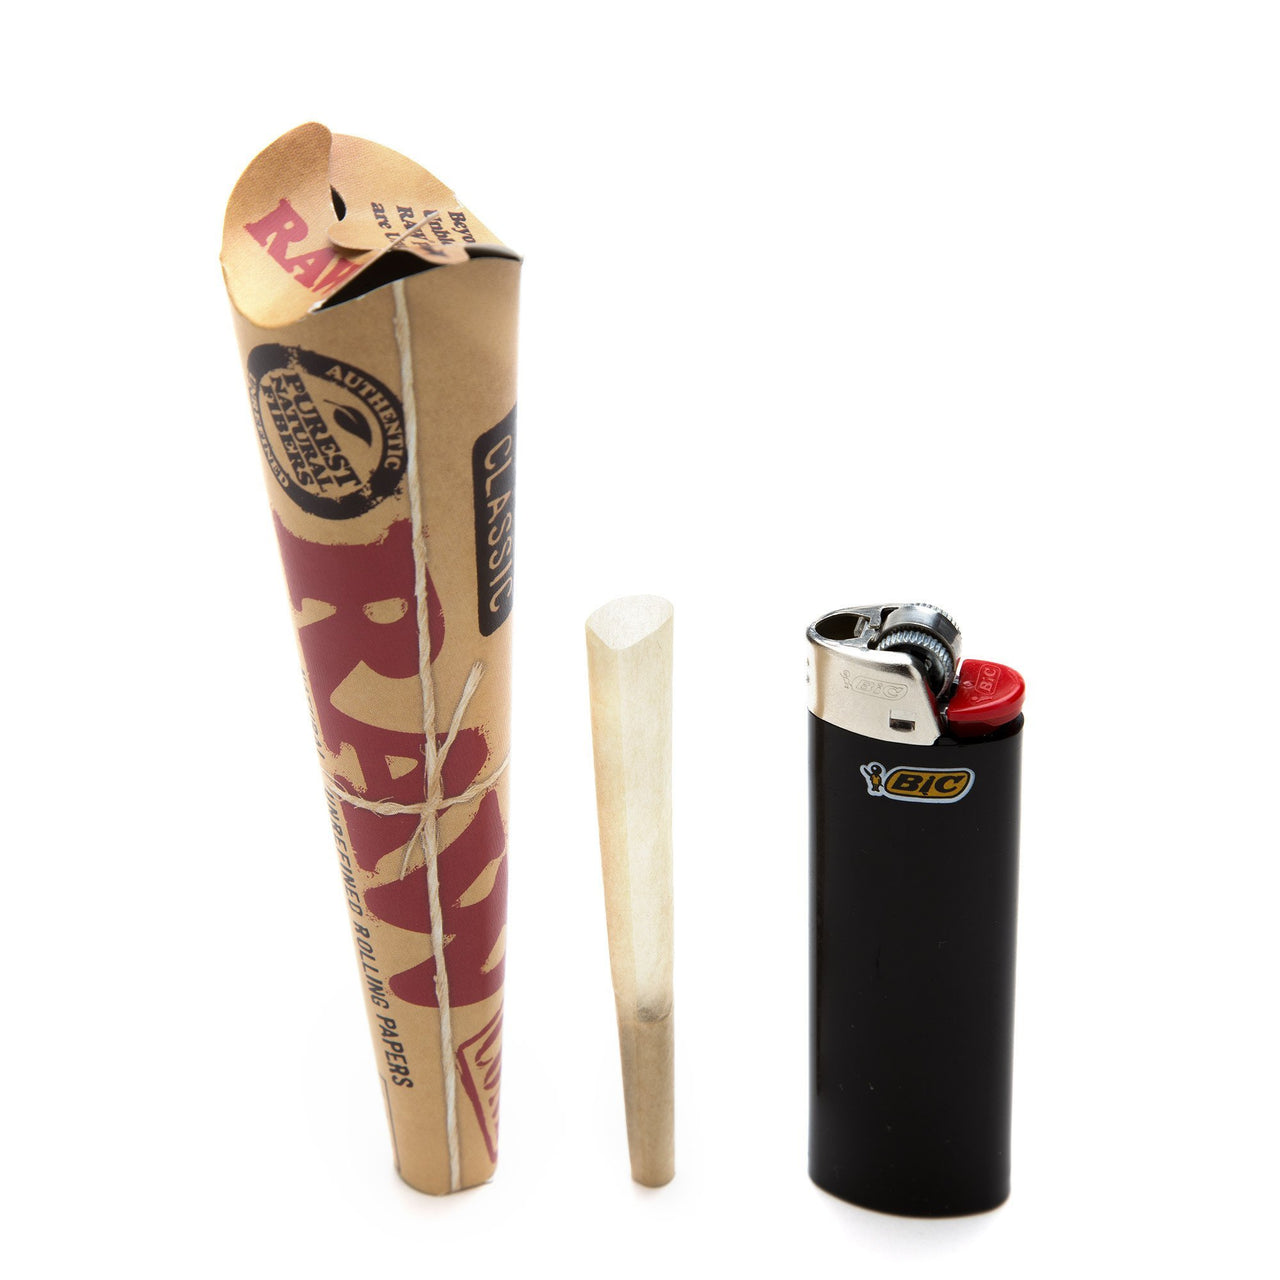 RAW Classic Pre-Rolled Cone Pack - 420 Science - The most trusted online smoke shop.